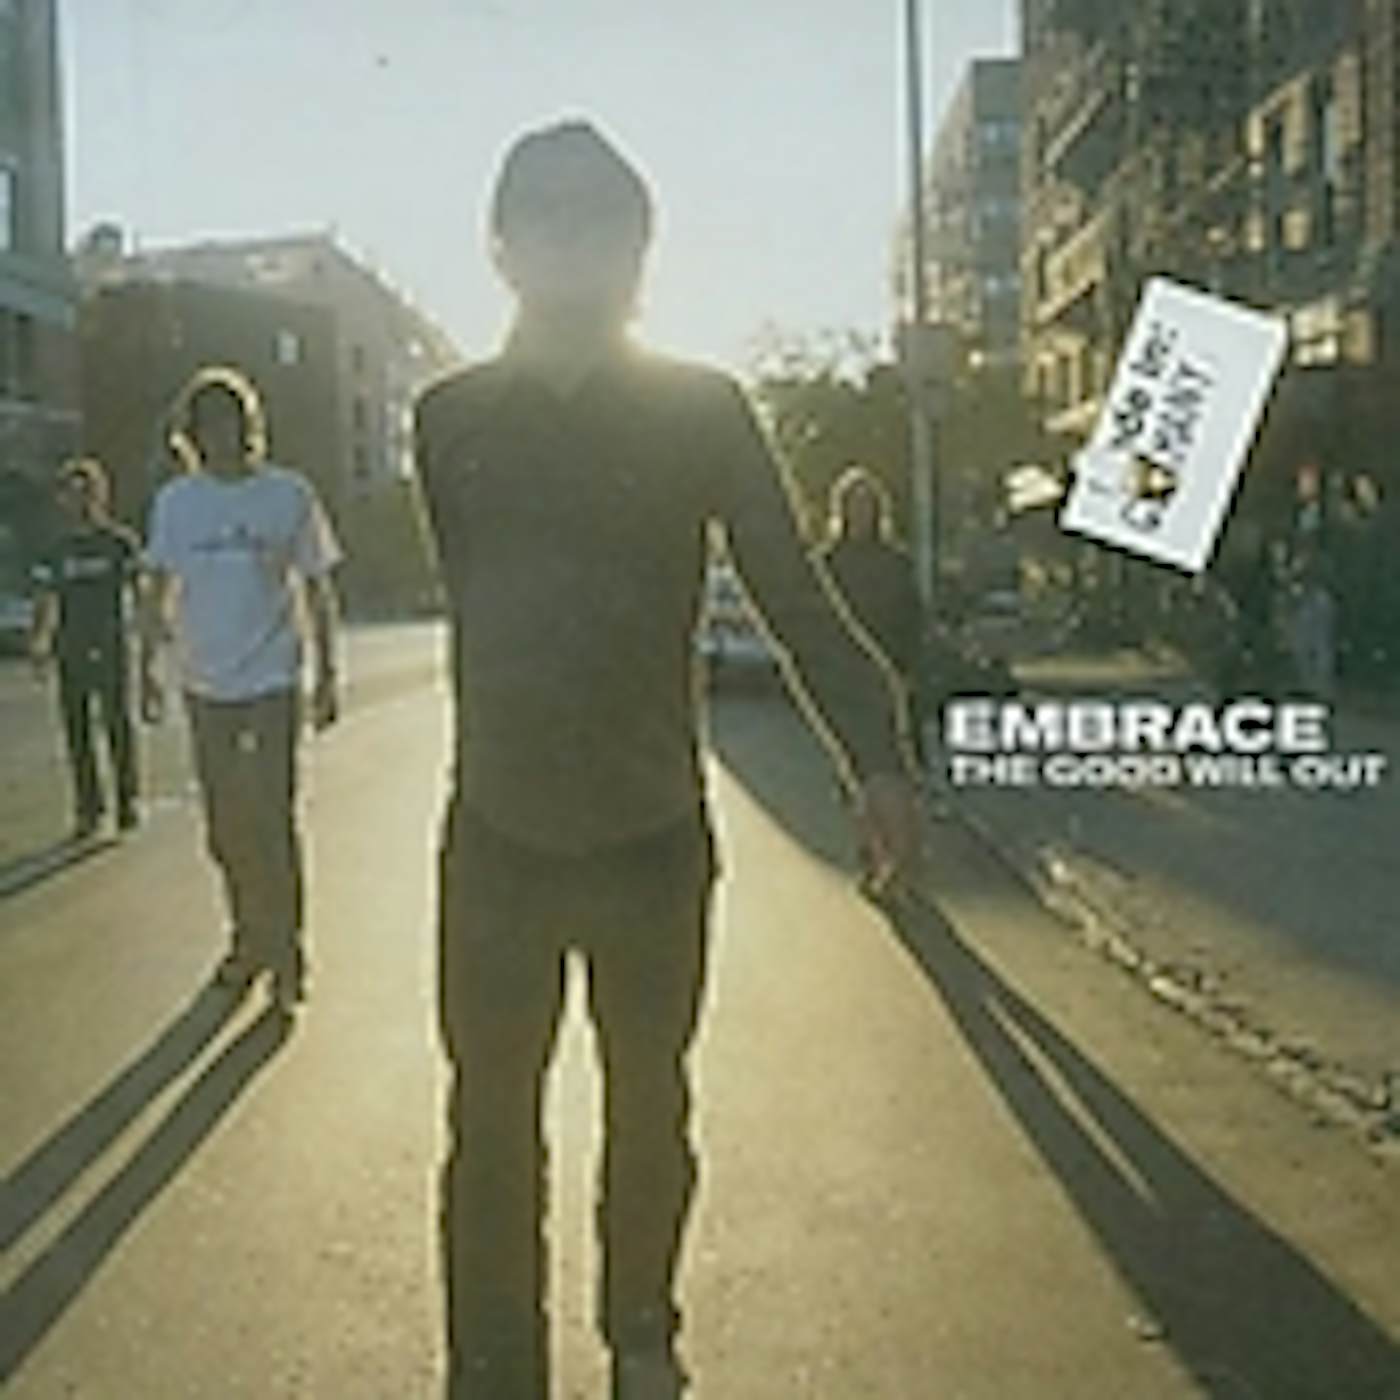 Embrace GOOD WILL OUT CD